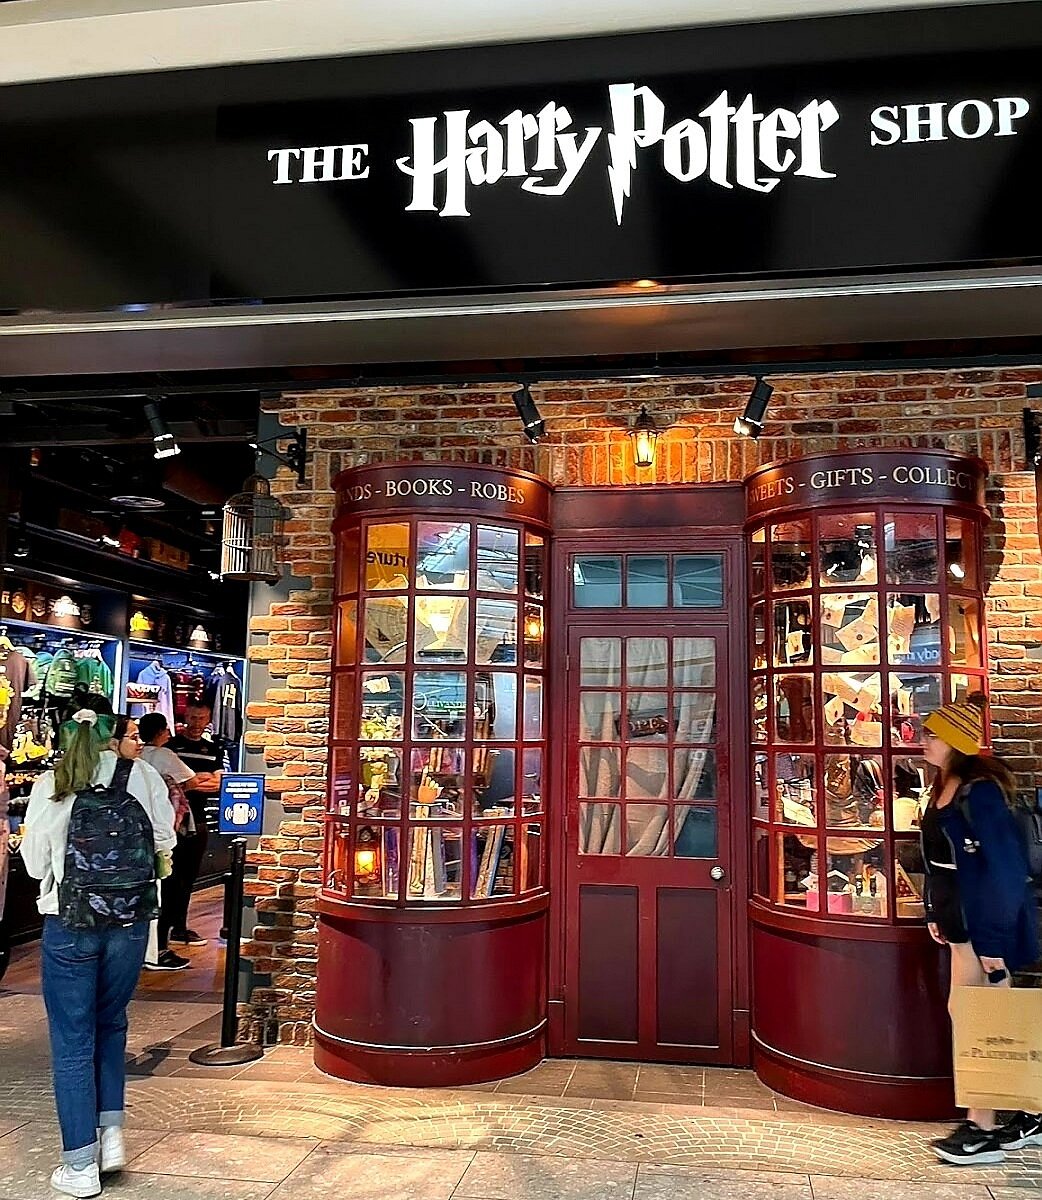 Don't Miss Out on These 11 Best Harry Potter Shops in London!